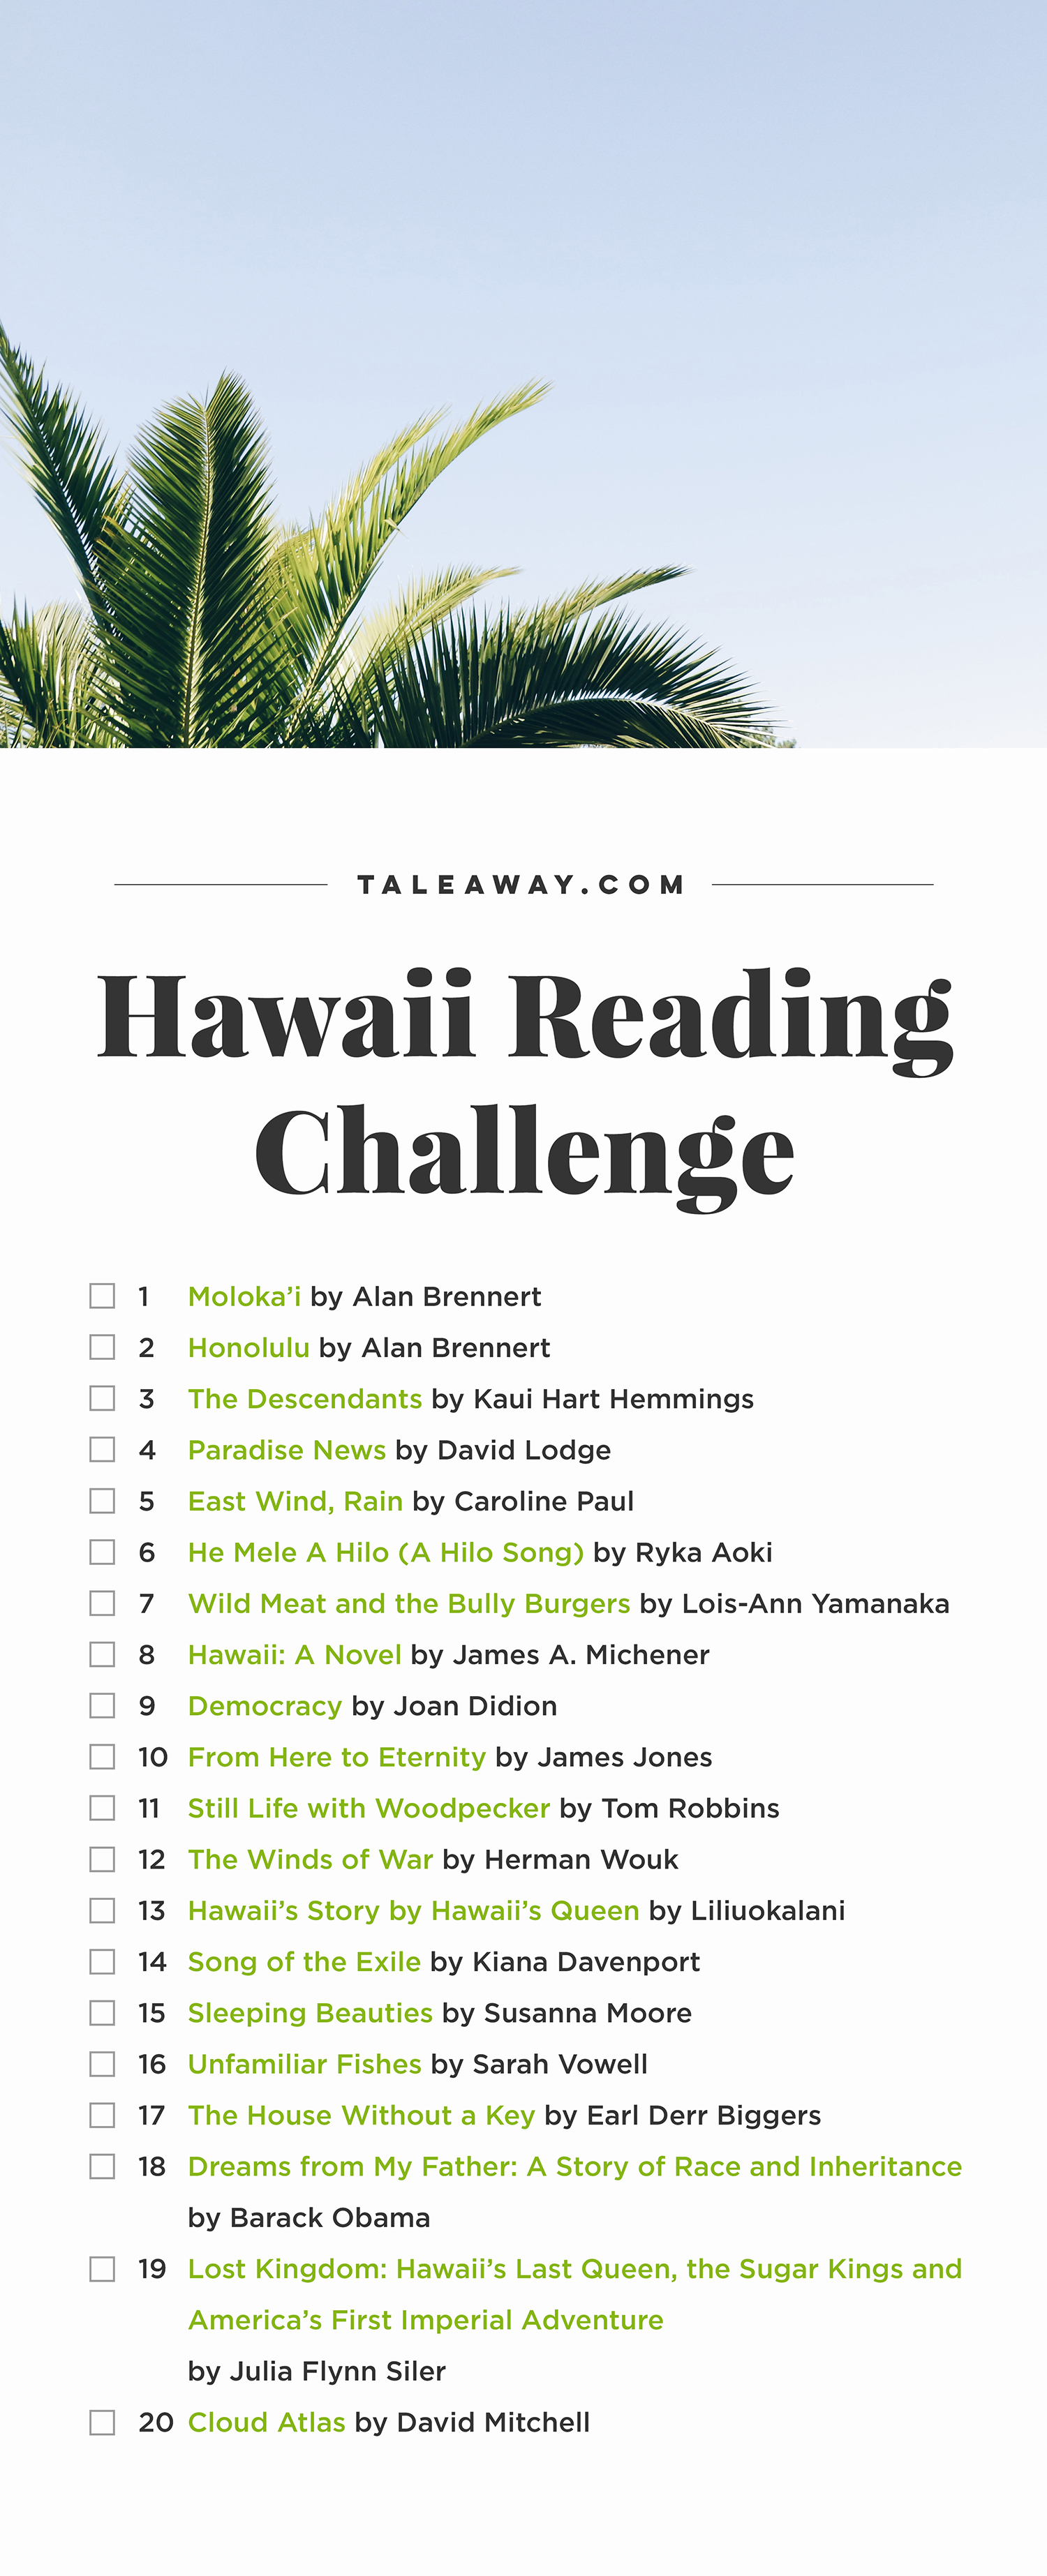 Hawaii Reading Challenge, Books Set In Hawaii - For more books visit www.taleway.com to find books set around the world. Ideas for those who like to travel, both in life and in fiction. reading challenge, hawaii reading challenge, book challenge, books you must read, books from around the world, world books, books and travel, travel reading list, reading list, books around the world, books to read, hawaii books, hawaii books novels, hawaii travel